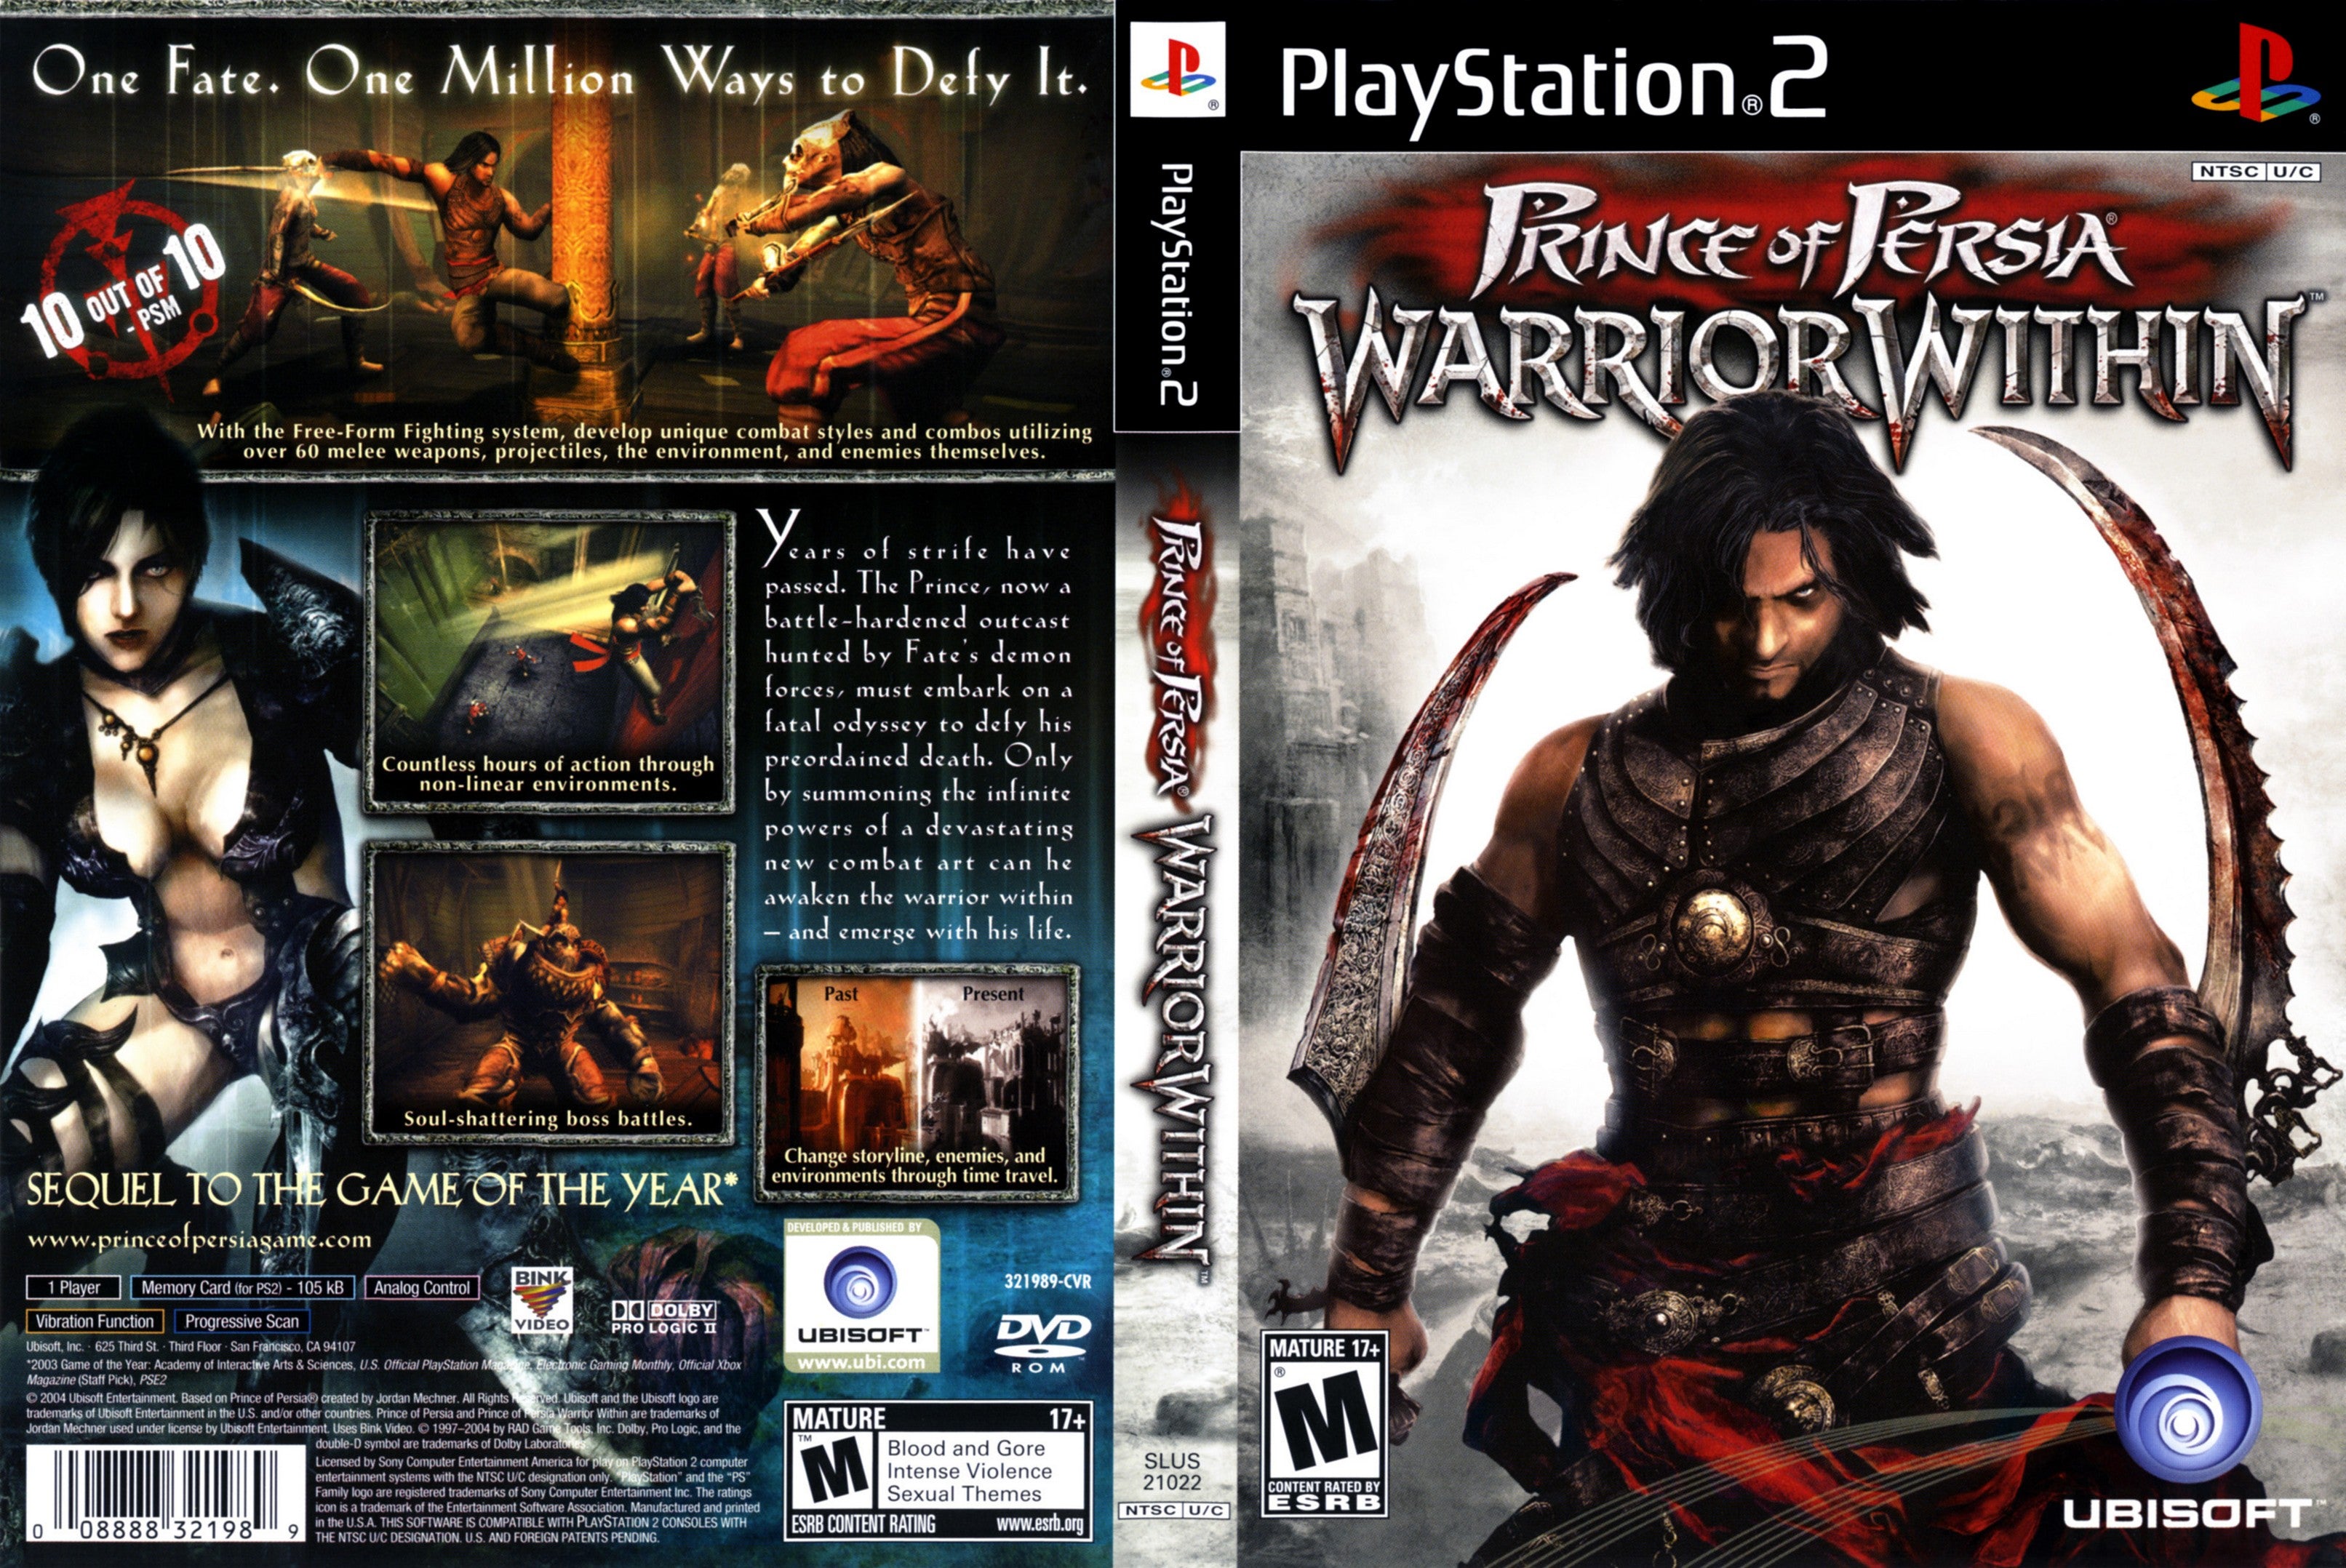 Prince of Persia Warrior Within - PlayStation 2, Ubi Soft, DVD 8888321989